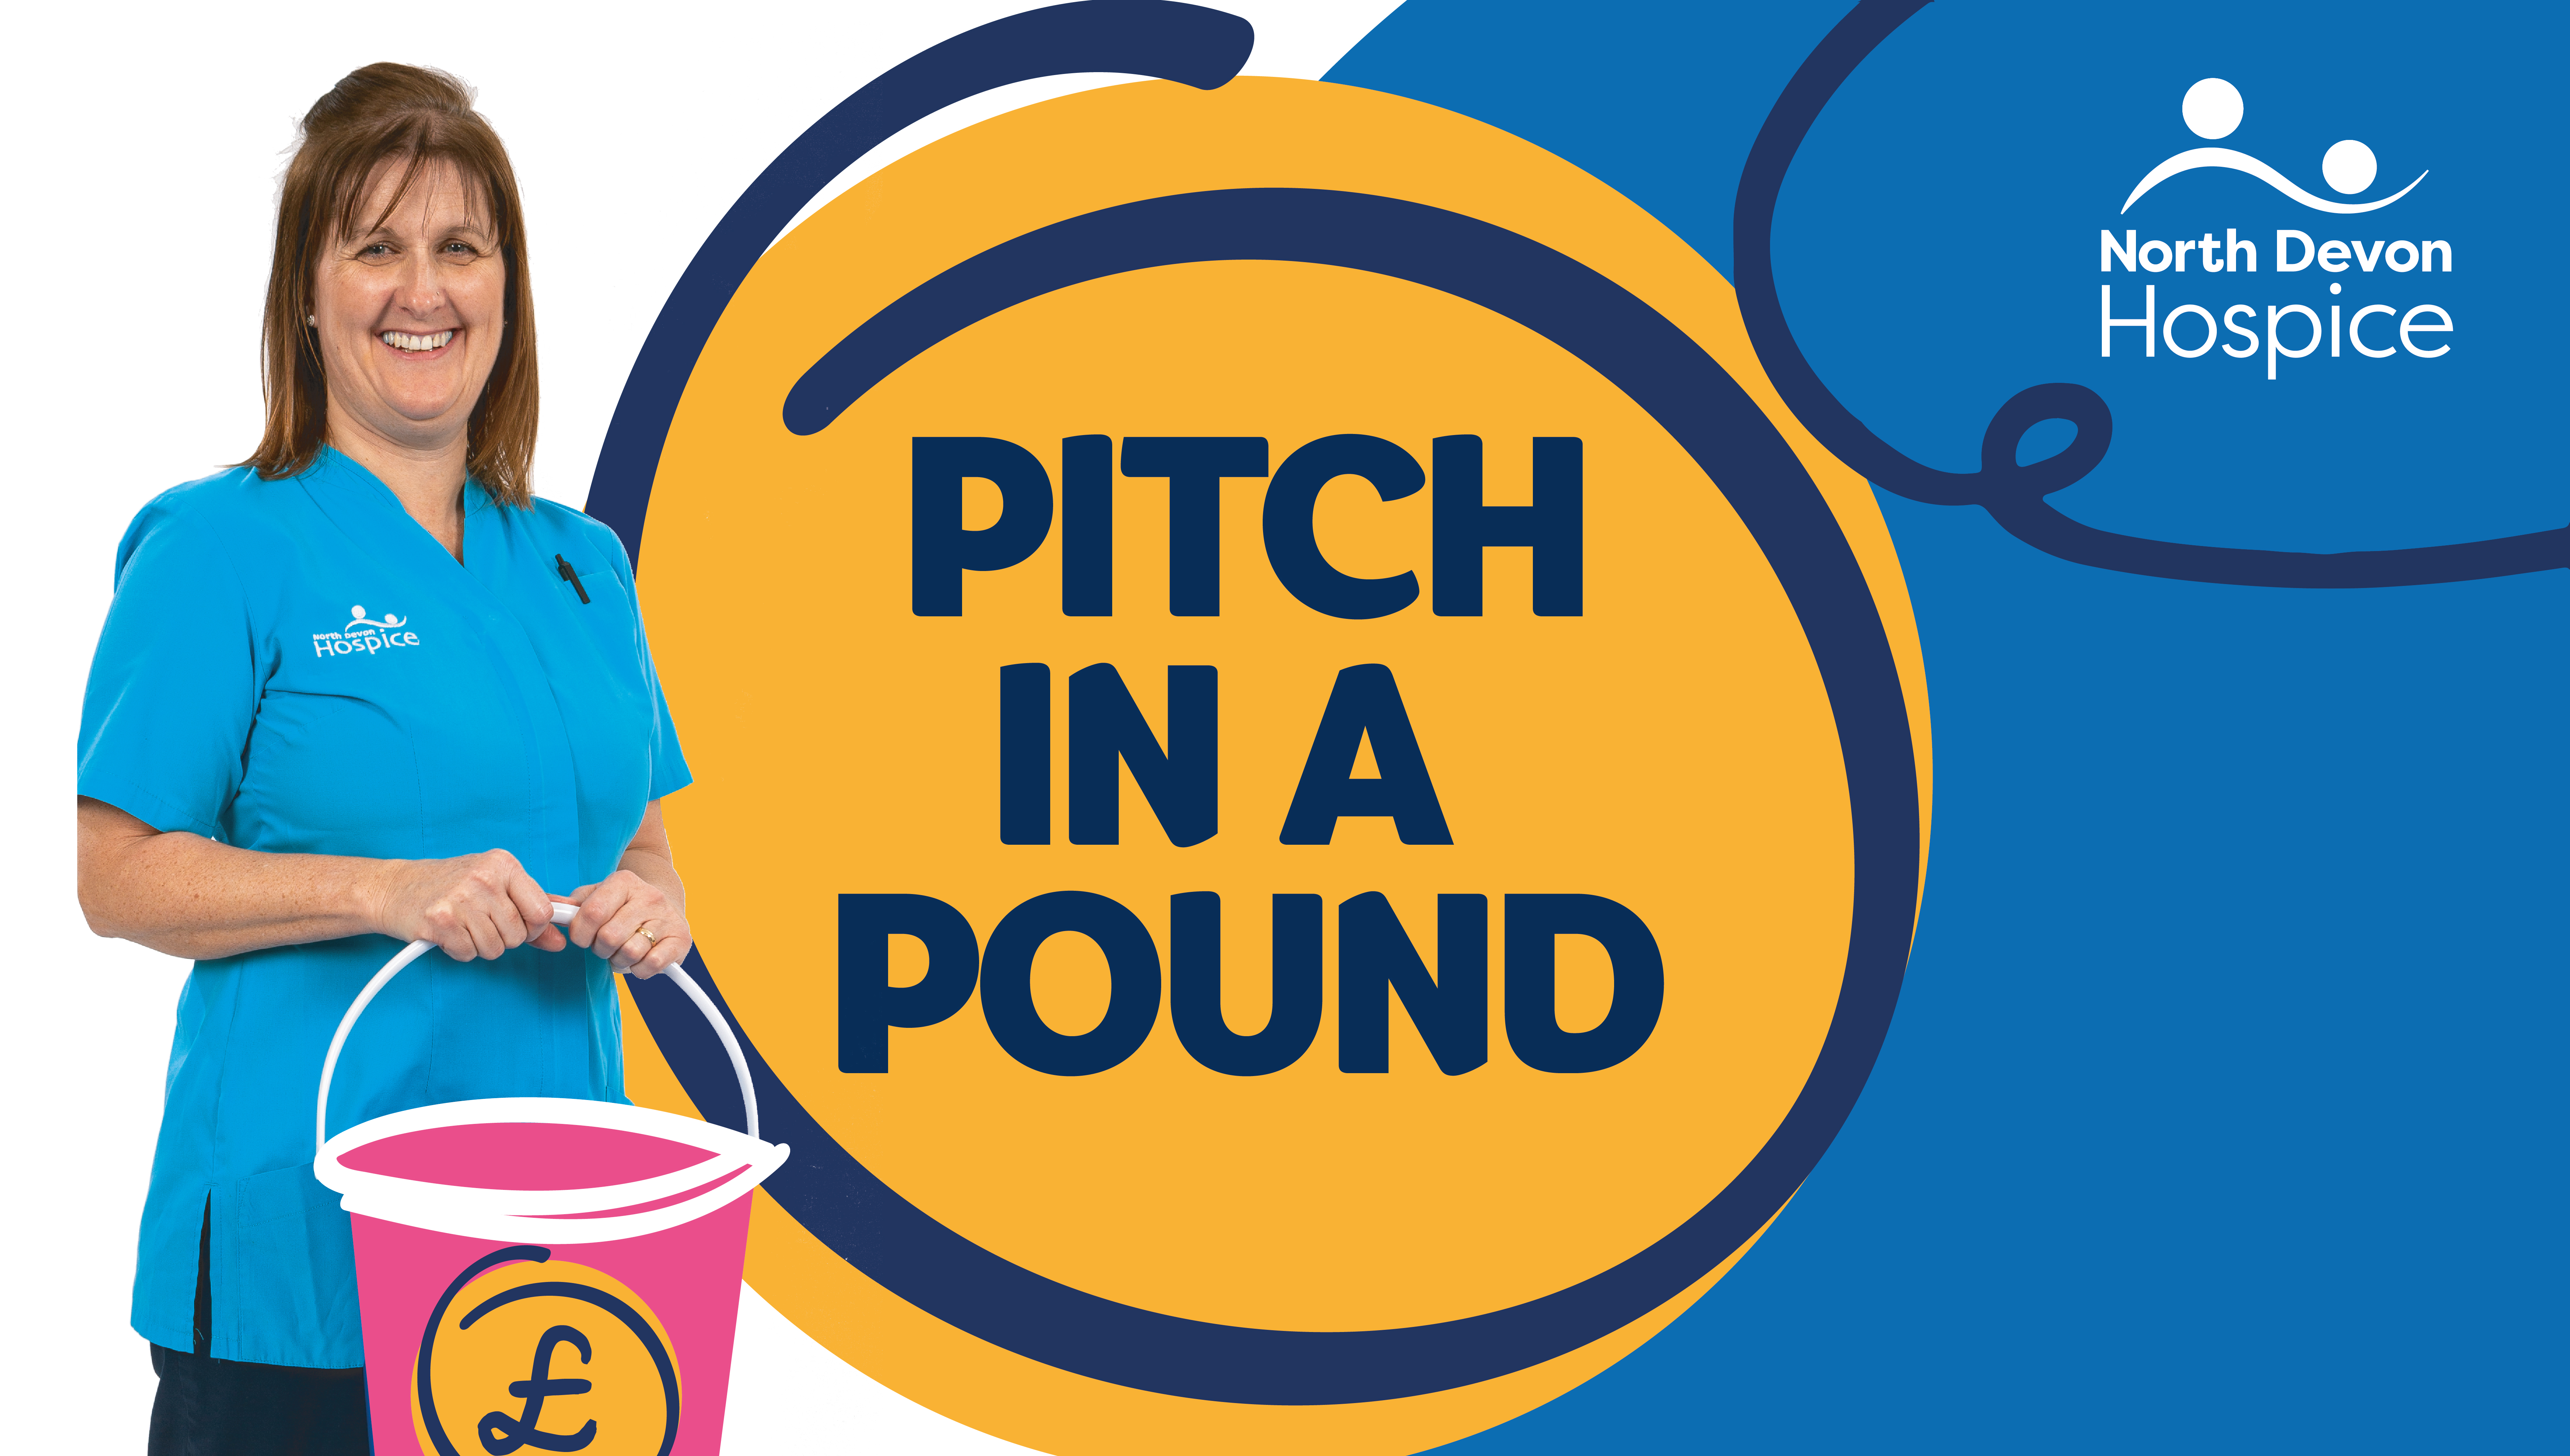 Pitch in a Pound